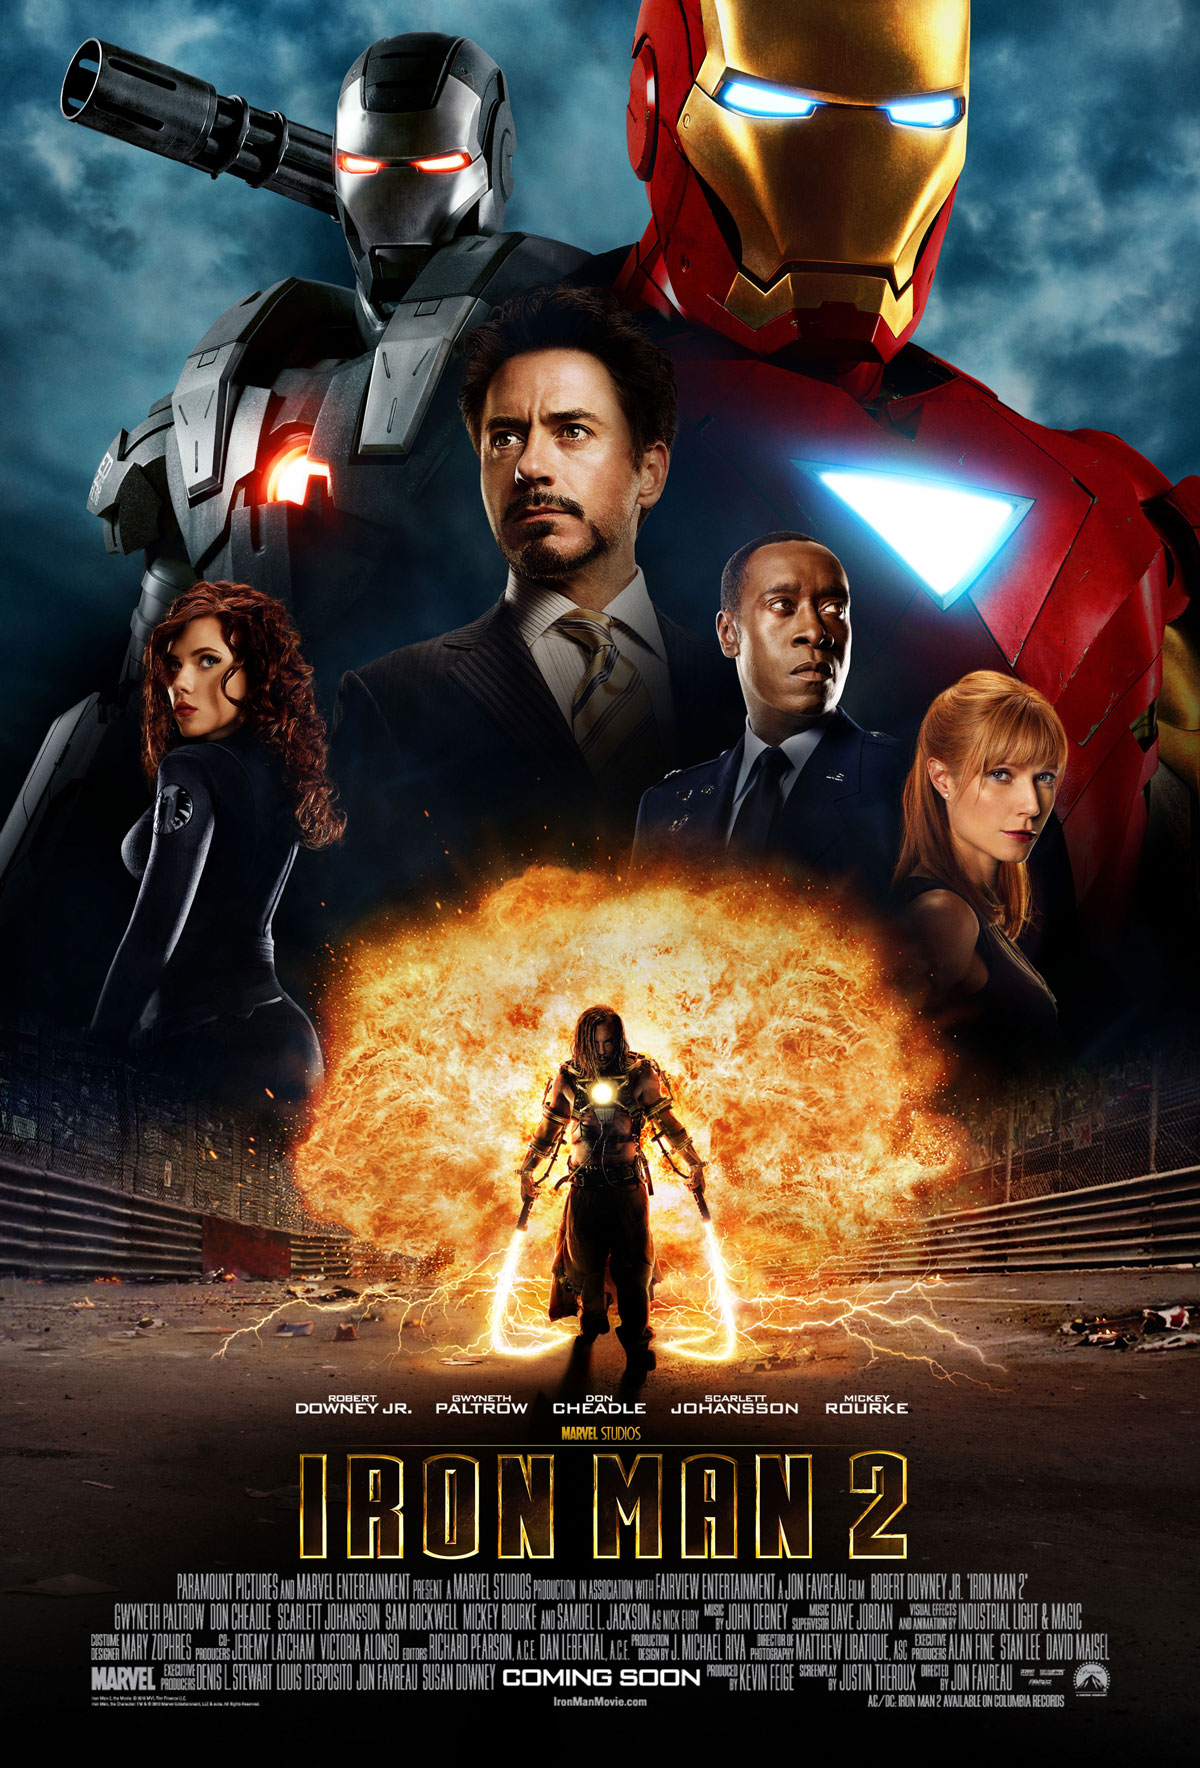 Quick Review: Iron Man 2 (2010)